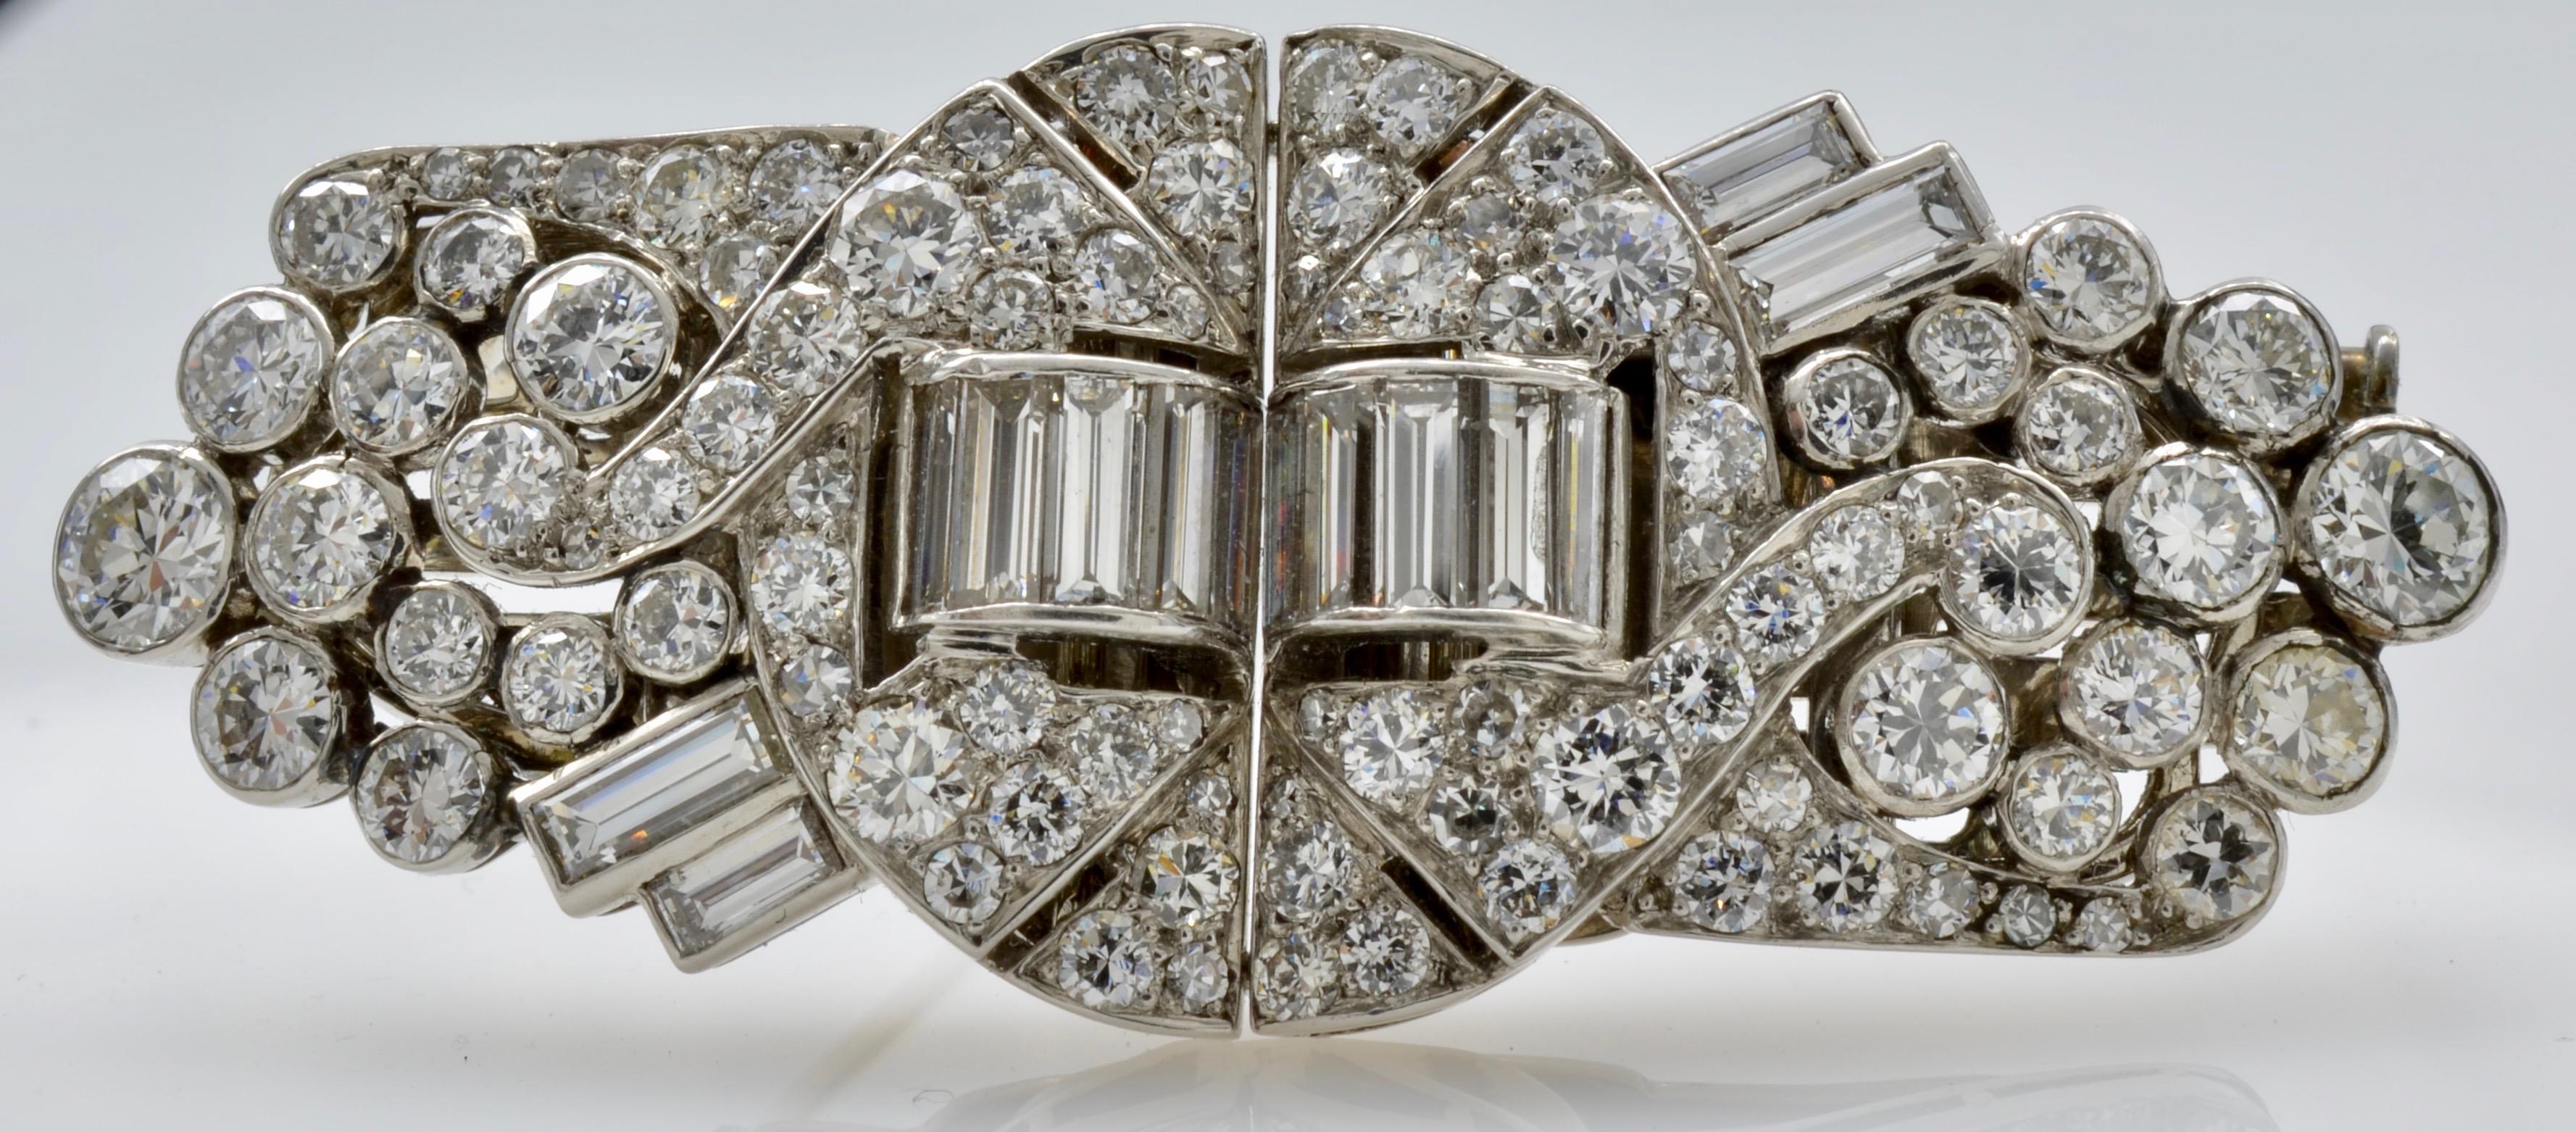 This exquisite Art Deco Diamond Brooch is full of beautiful baguette diamonds and pristine old mine cut diamonds which create depth and sparkle. The total weight of the baguette diamonds are 1.80 and the total weight of the old mine cuts are 4.80